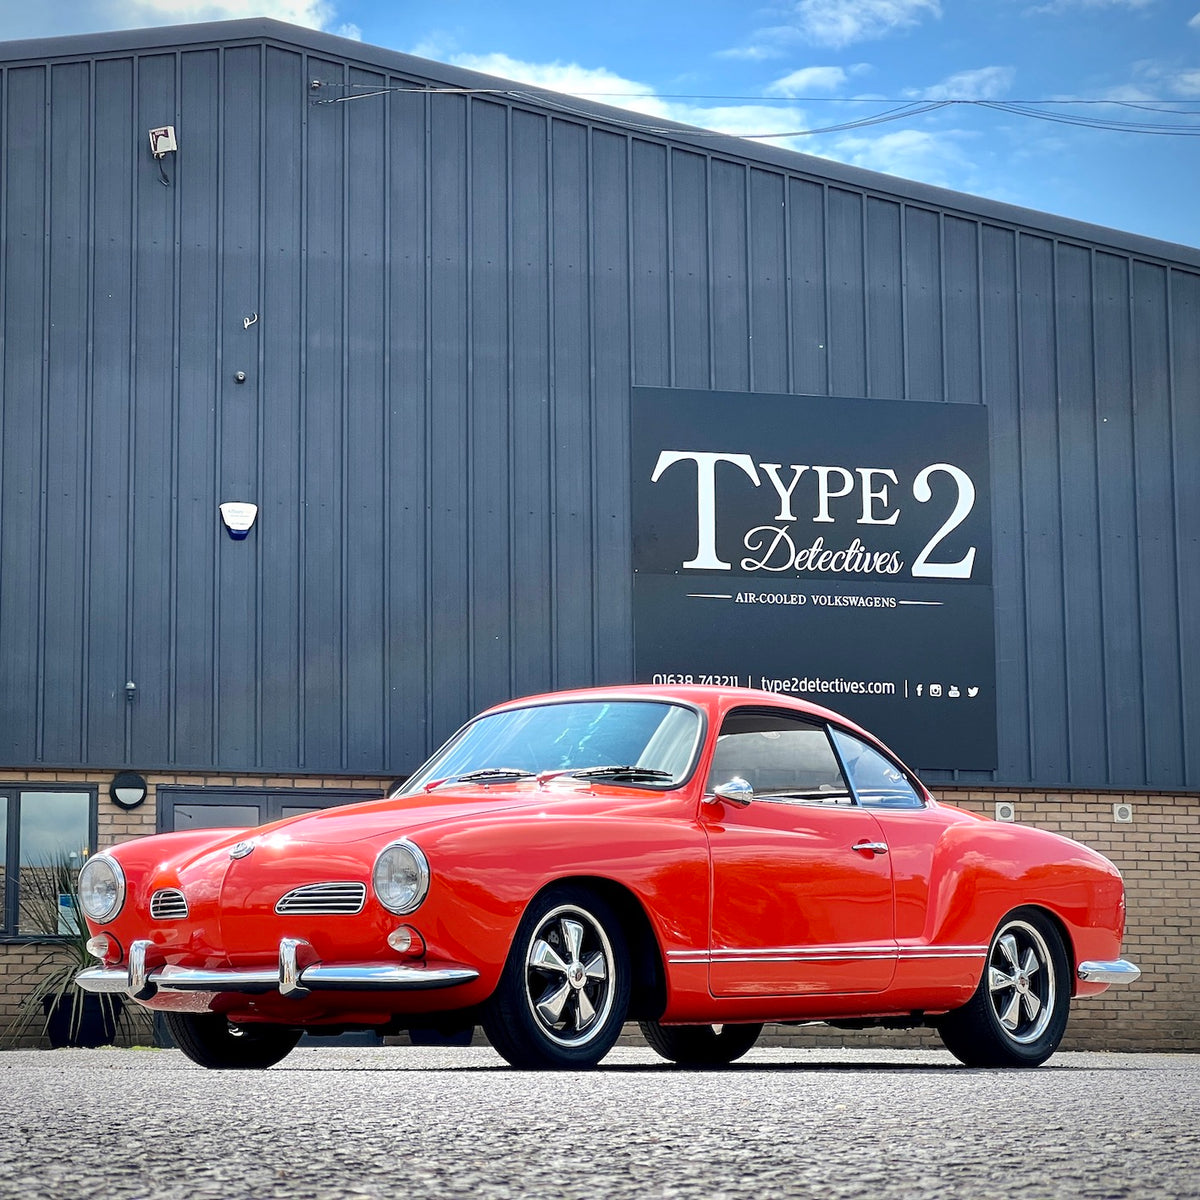 Karmann Ghia Coupe 1969 DKP Car - One of the best builds ever....